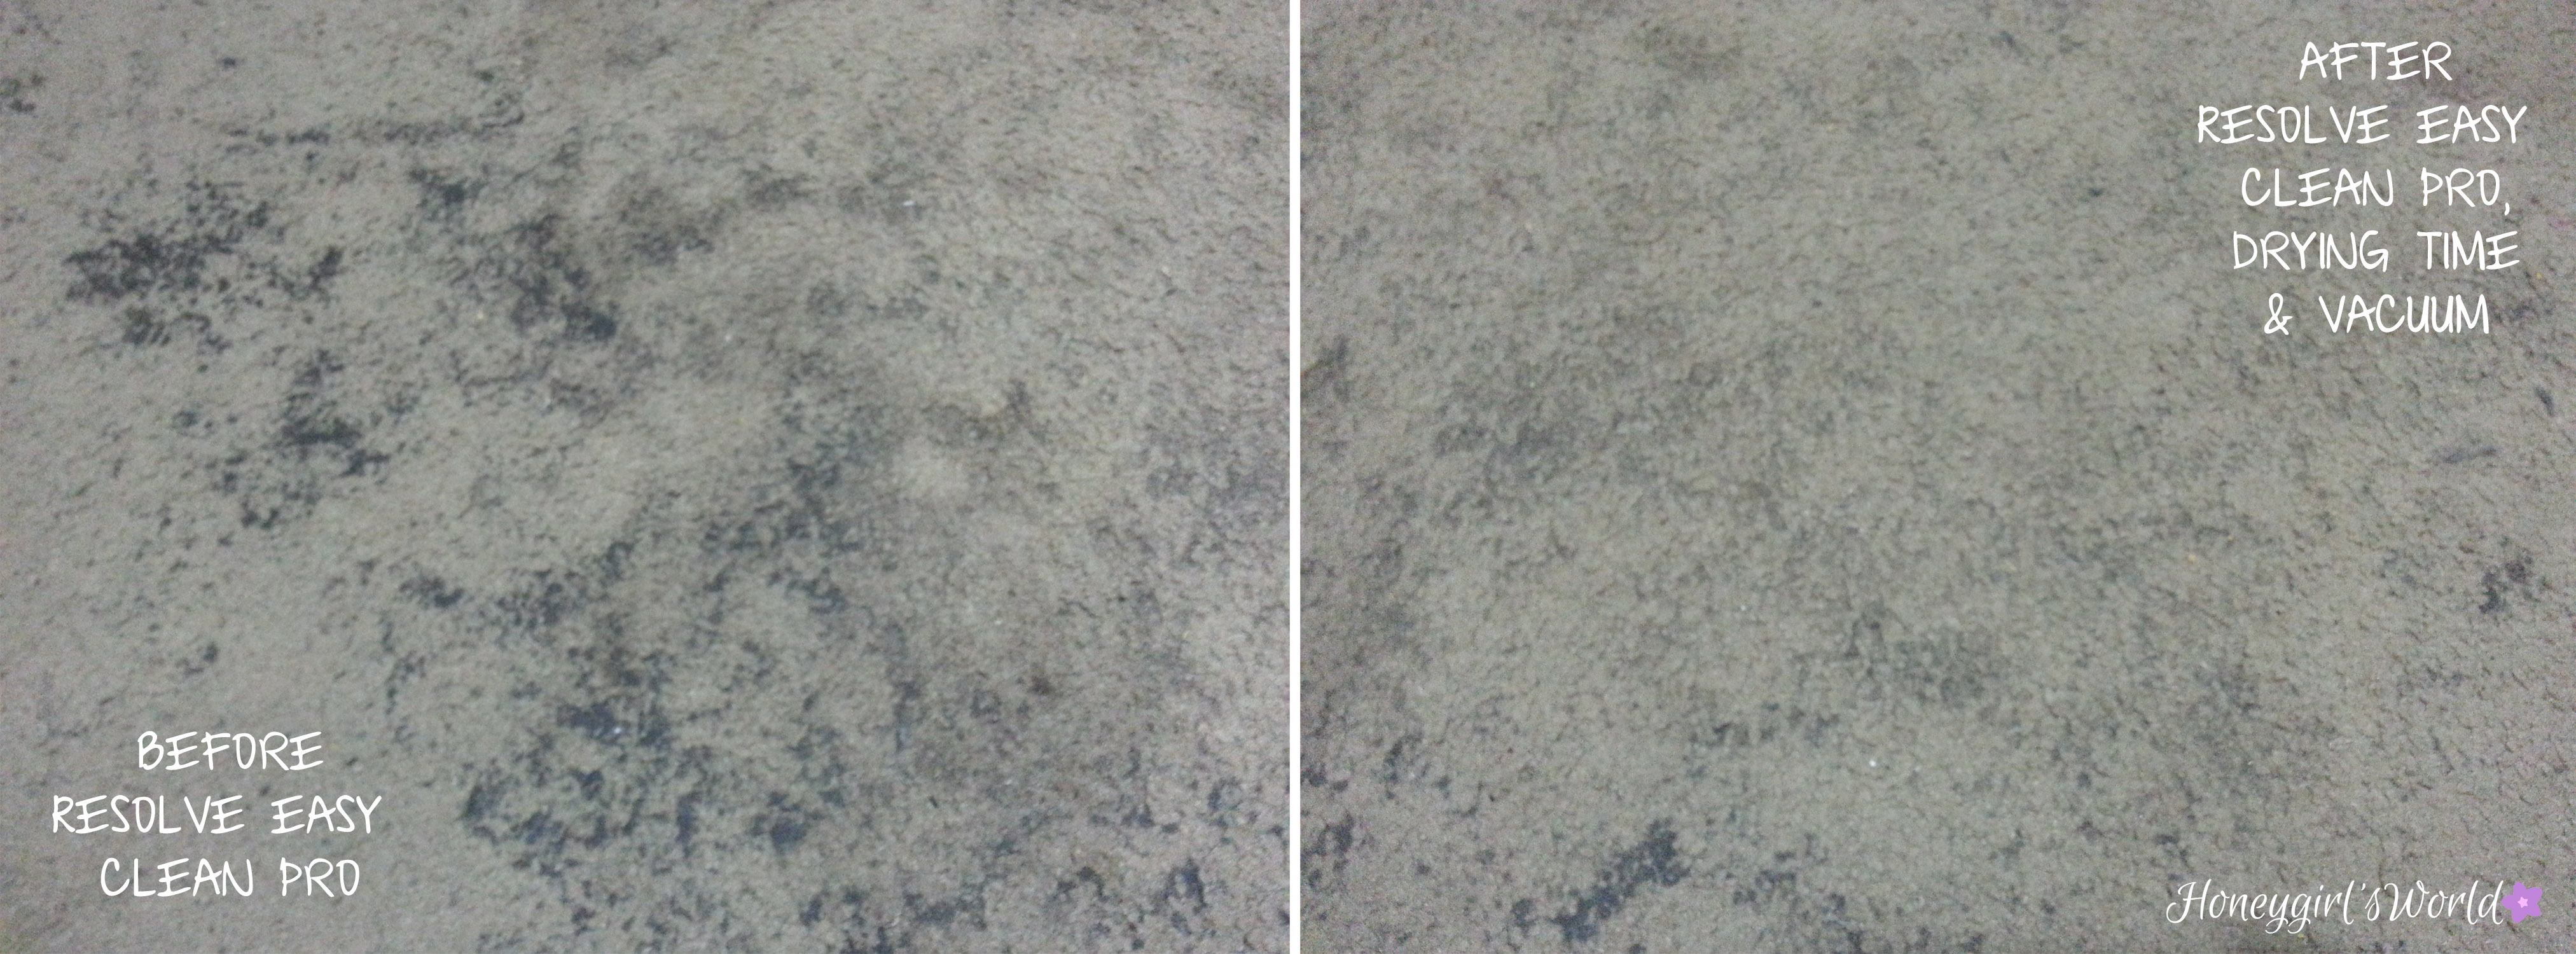 resolve carpet cleaner before and after